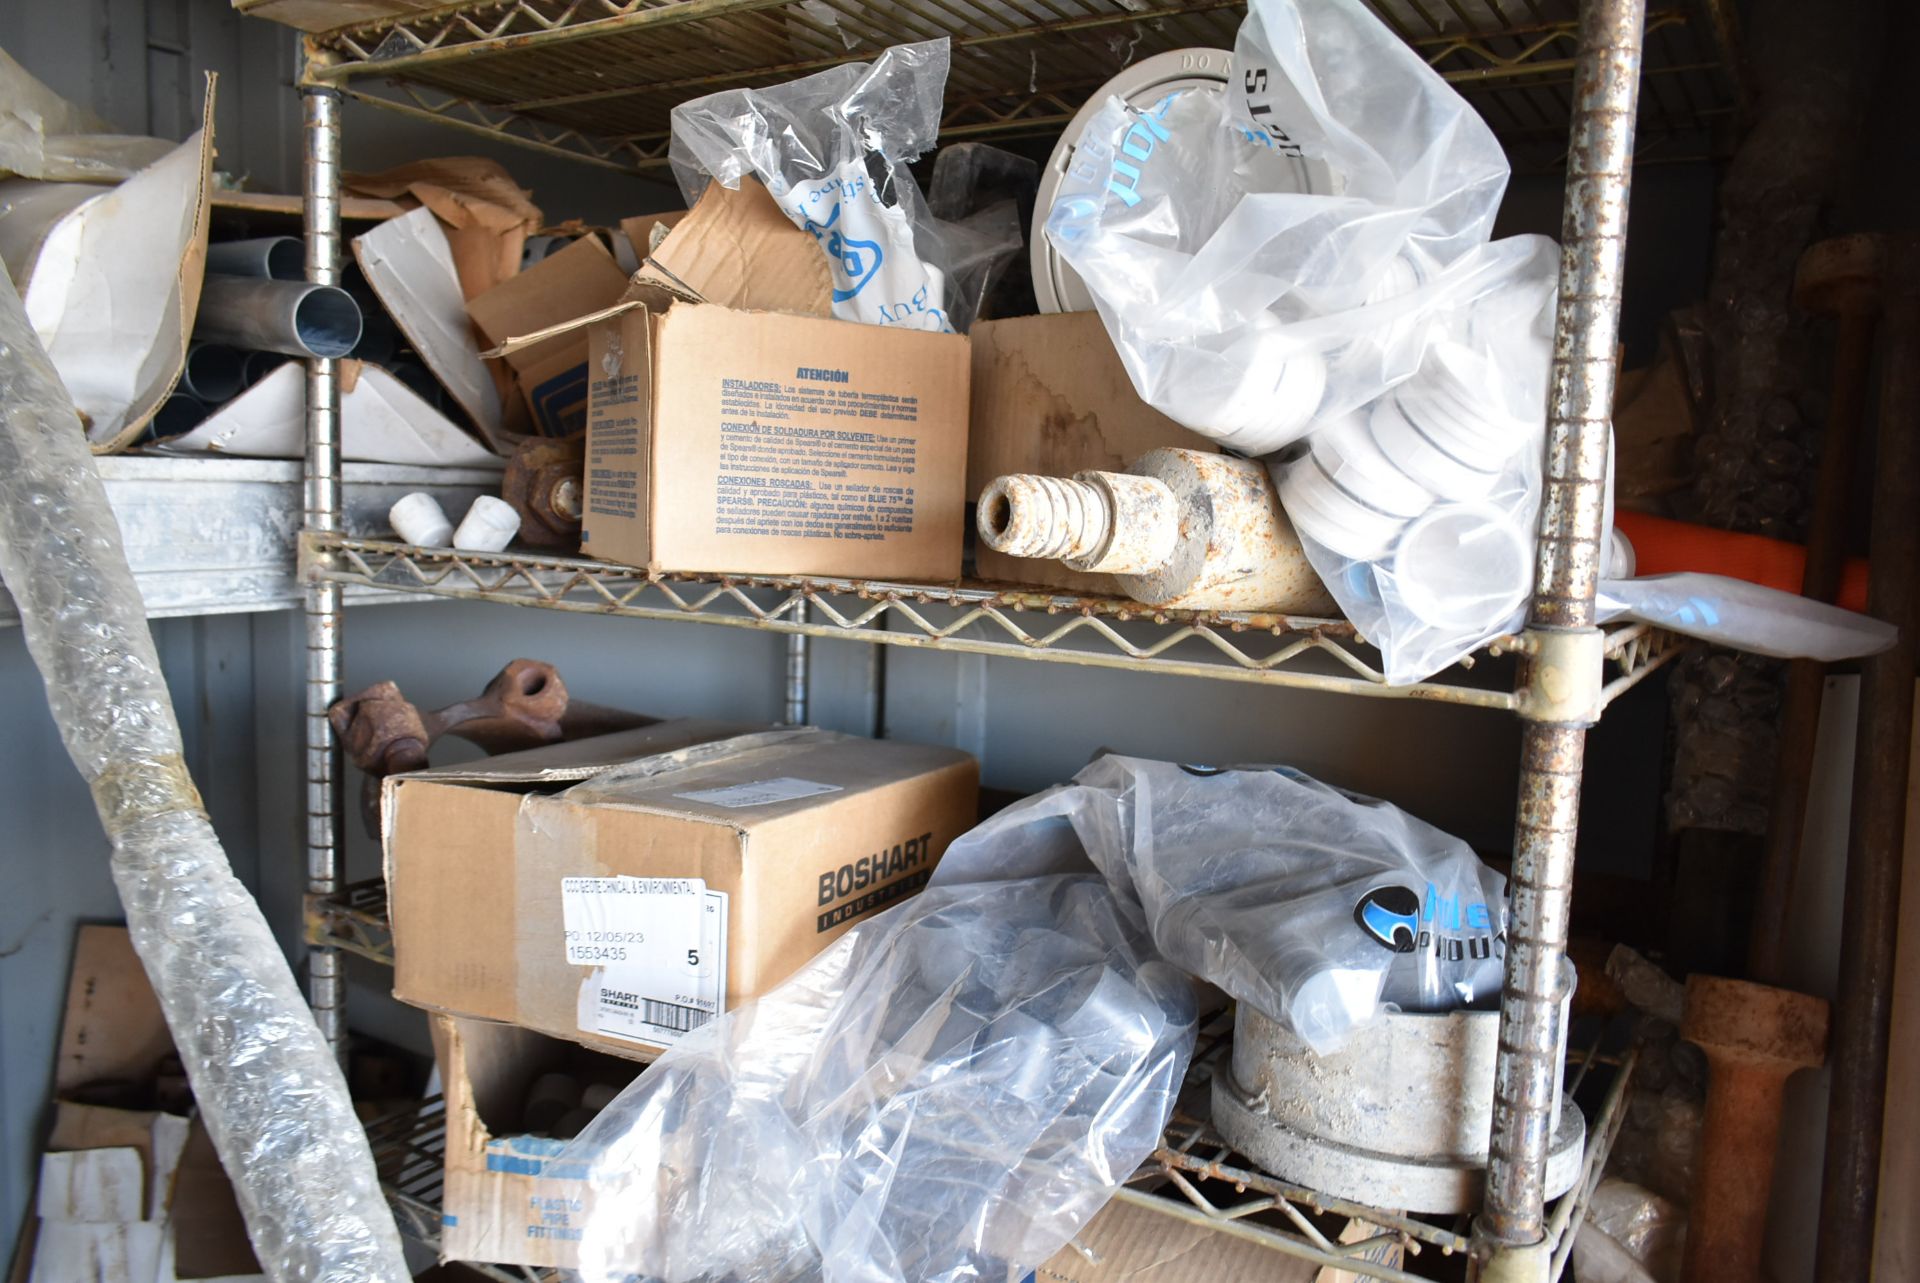 LOT/ CONTENTS OF SHELF CONSISTING OF PIPE FITTINGS, PARTS & HARDWARE - Image 3 of 3